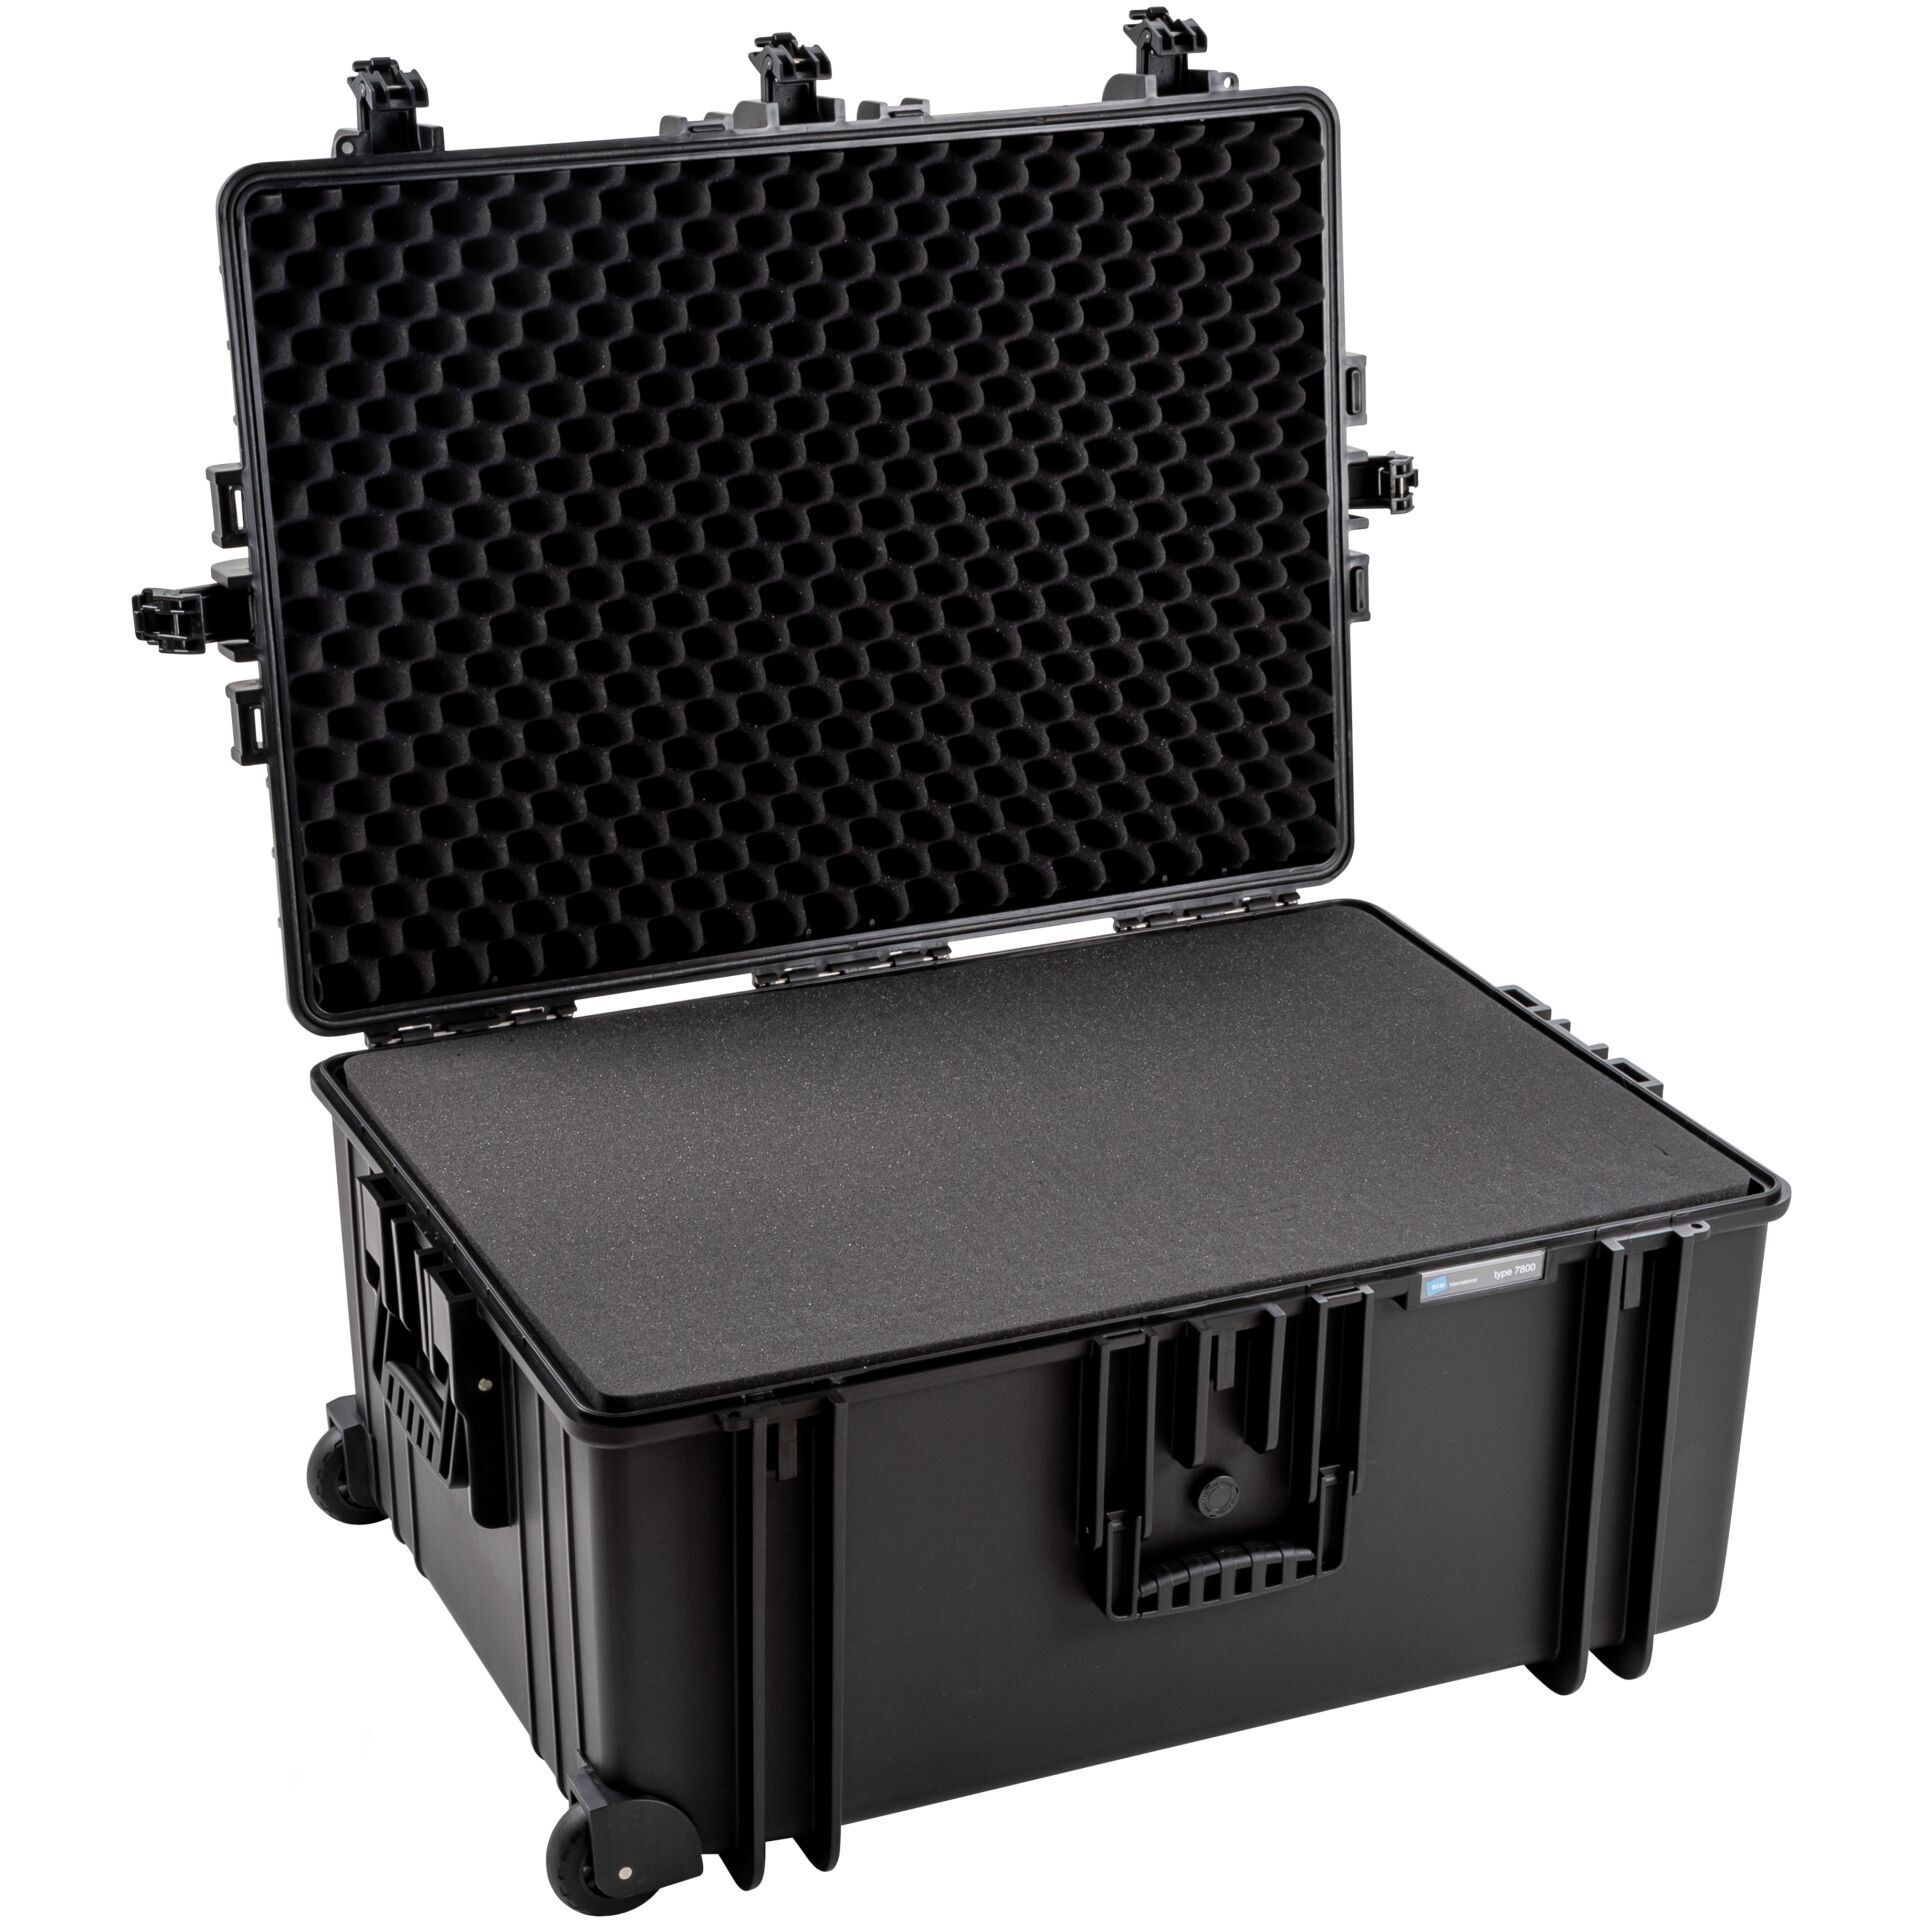 B&W Carrying Case Outdoor Type 7800 with pre-cut foam